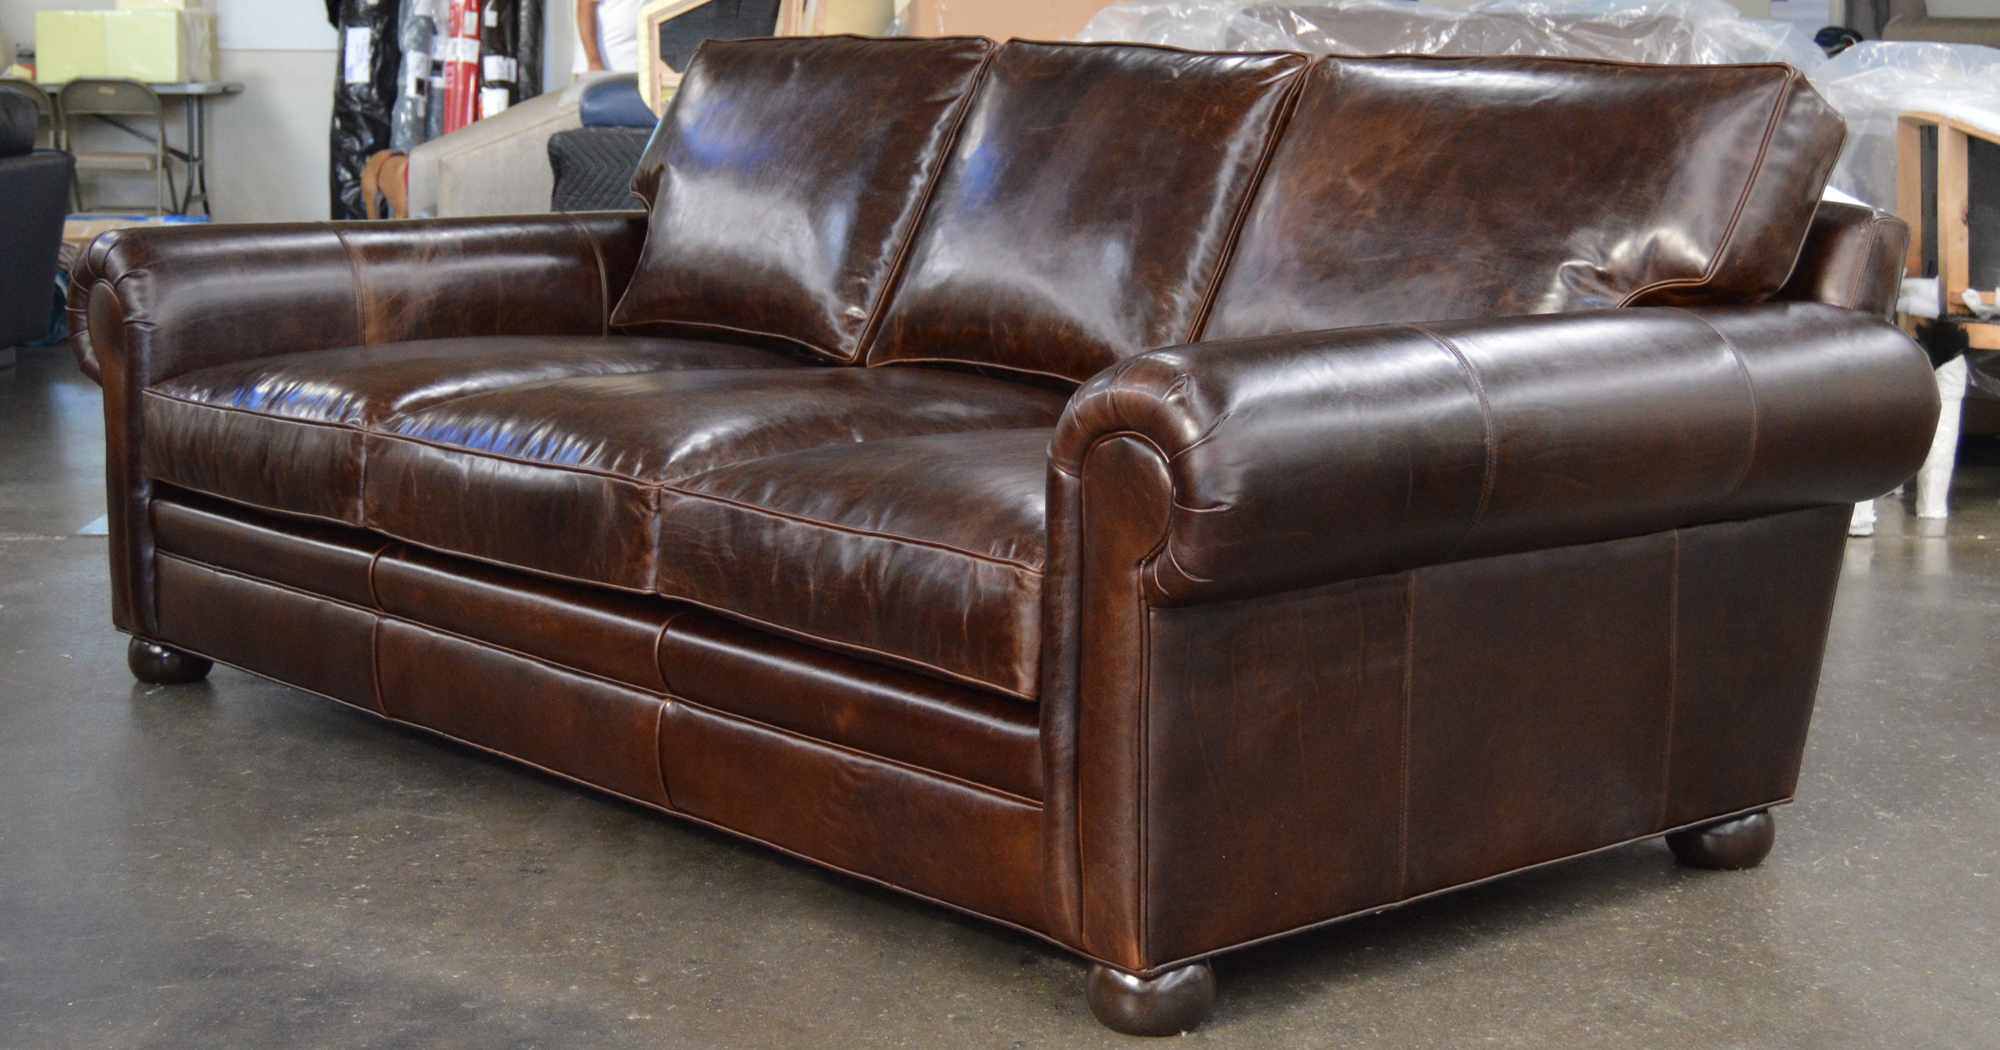 Finance your new Leather Furniture with Special Financing options through Synchrony Financial